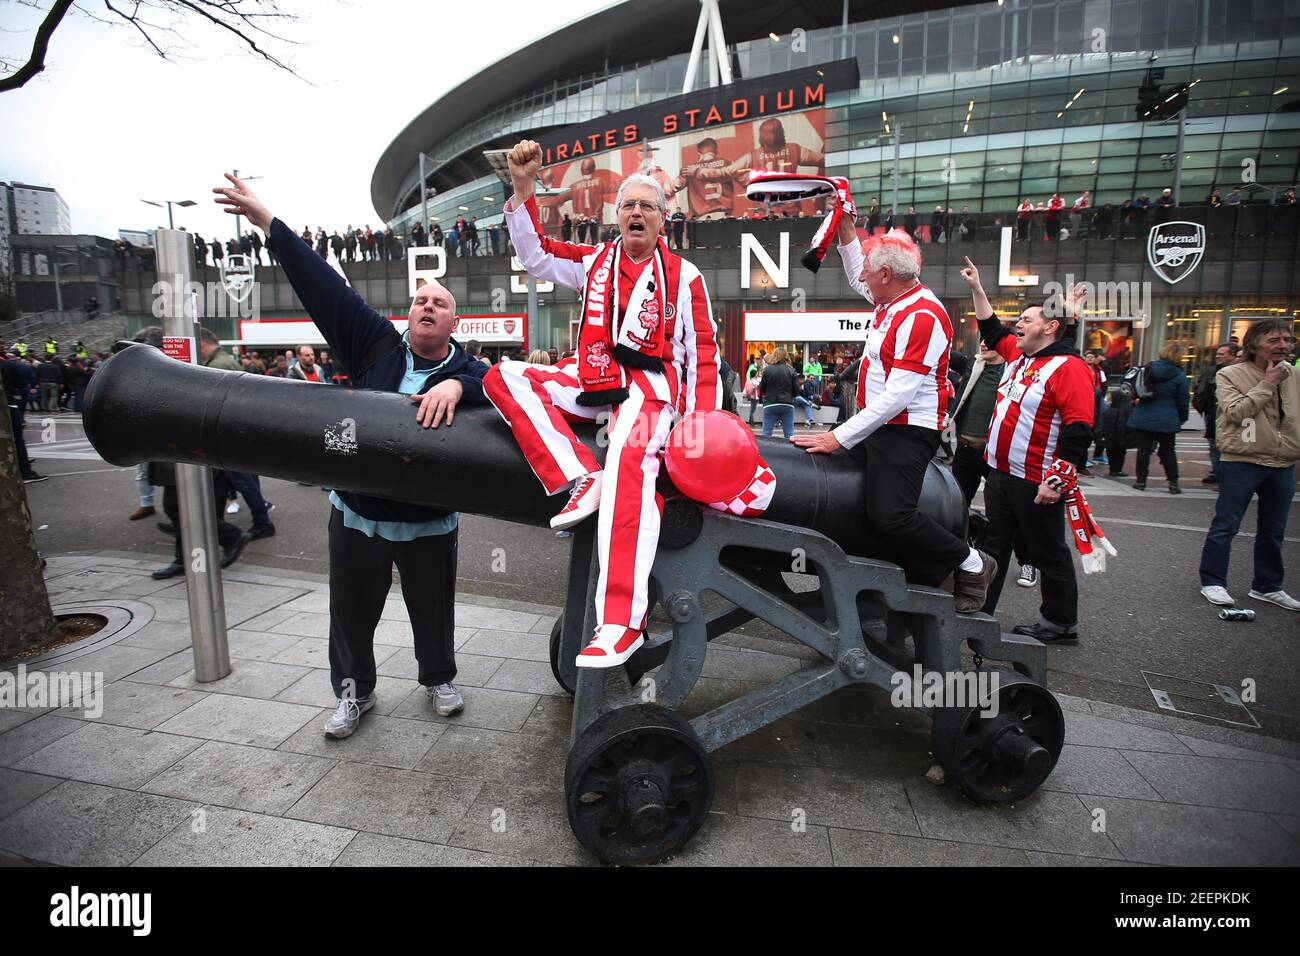 Britain Football Soccer - Arsenal v Lincoln City - FA Cup Quarter Final - The Emirates Stadium - 11/3/17 Lincoln fans outside the stadium before the match  Reuters / Paul Hackett Livepic EDITORIAL USE ONLY. No use with unauthorized audio, video, data, fixture lists, club/league logos or 'live' services. Online in-match use limited to 45 images, no video emulation. No use in betting, games or single club/league/player publications.  Please contact your account representative for further details. Stock Photo